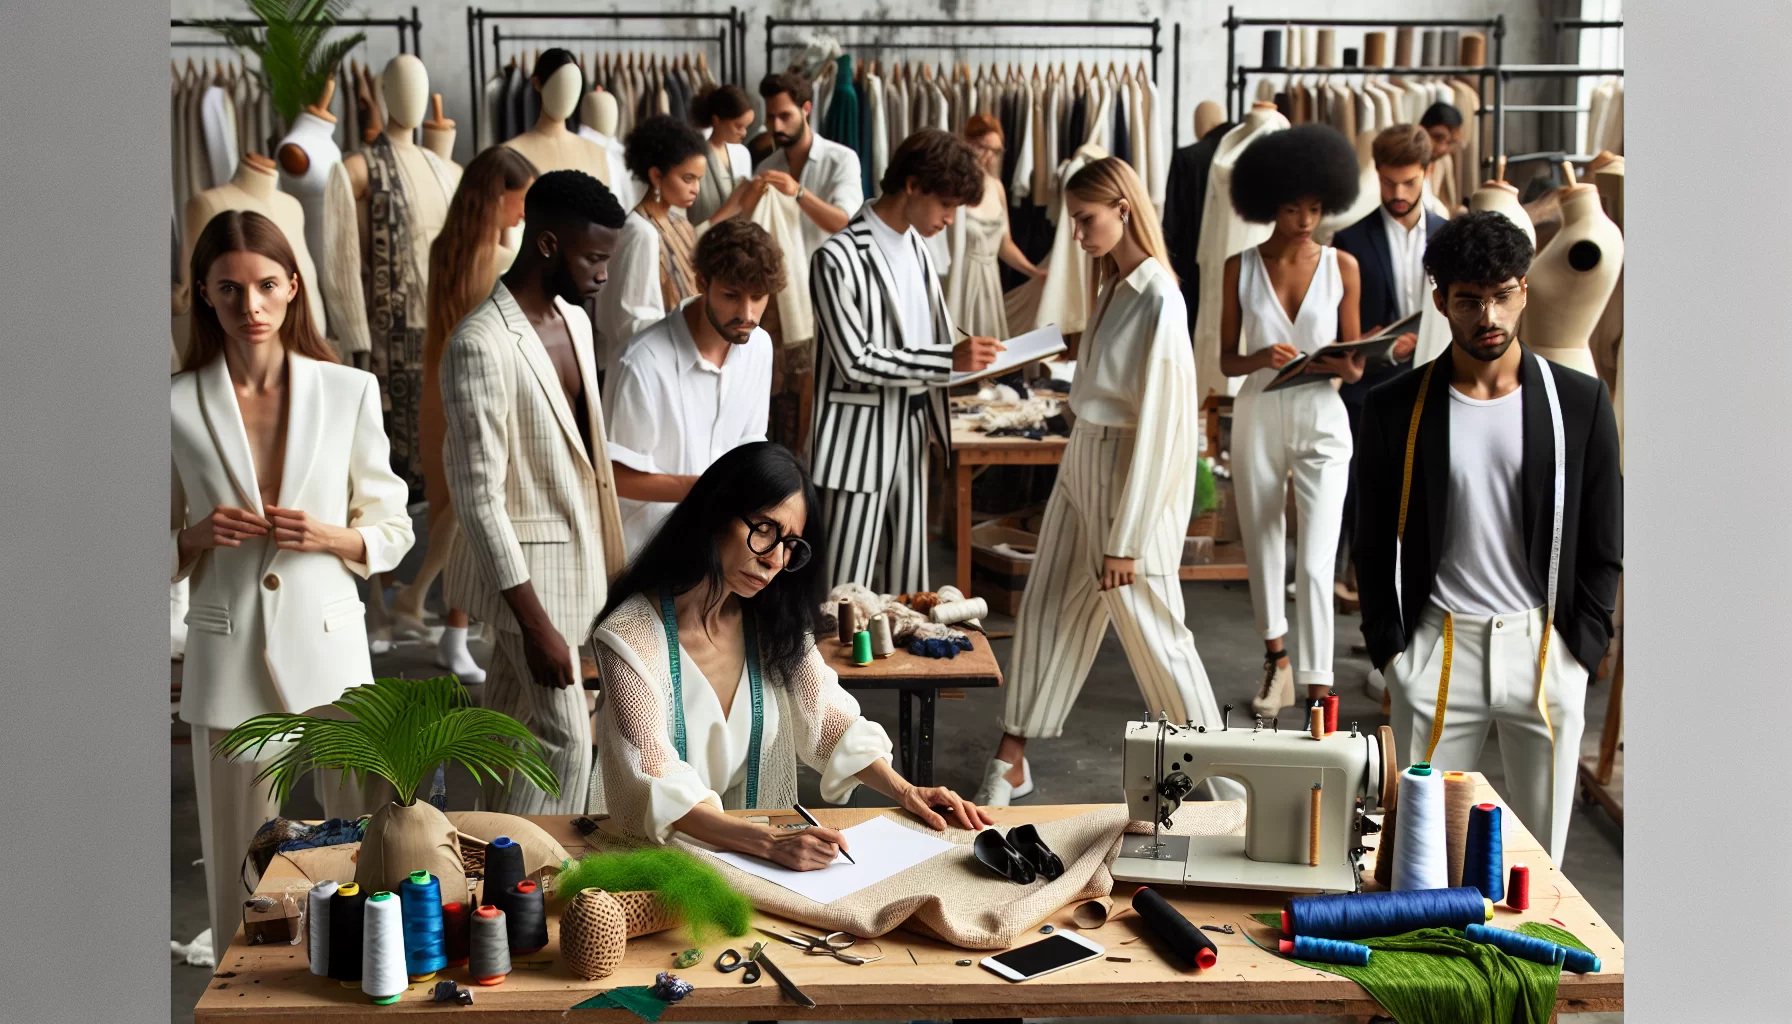 Peter Copping ushers in a new, sustainable era at iconic fashion house Lanvin